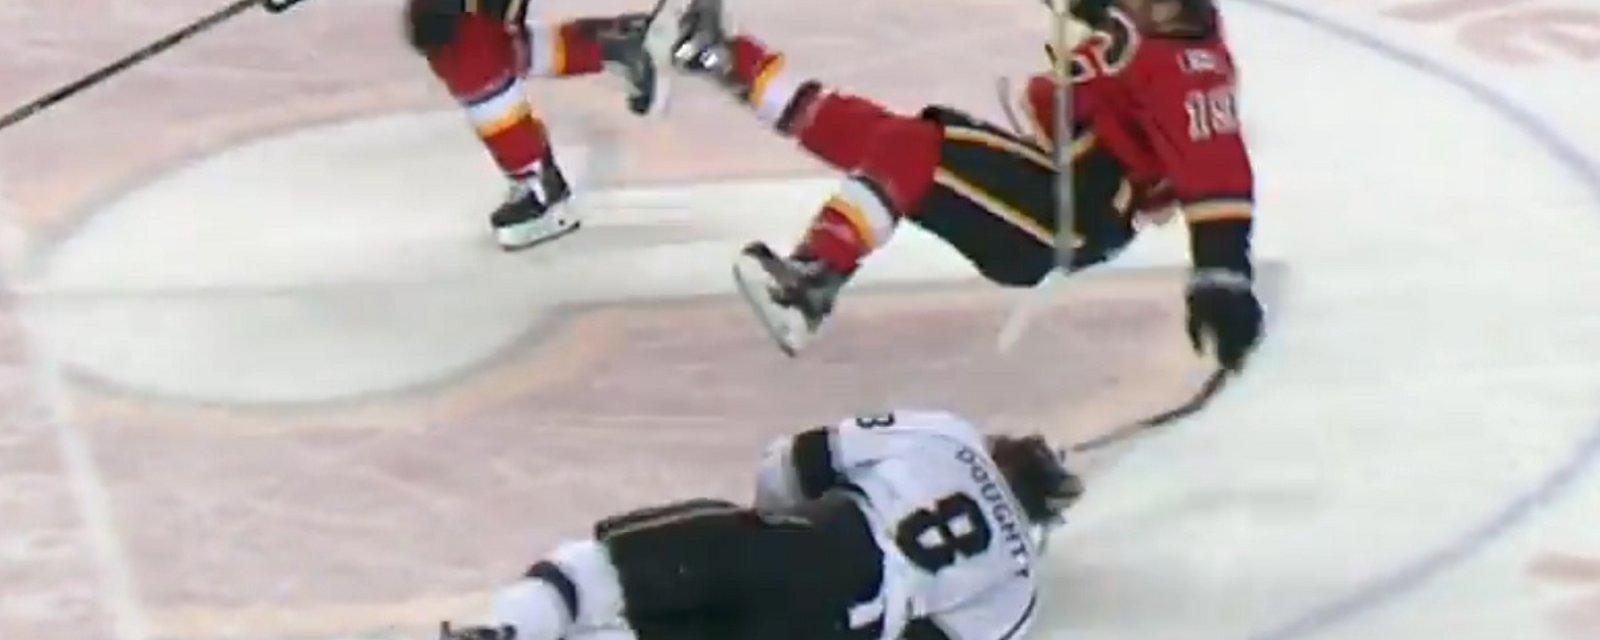 Drew Doughty just barely avoids getting destroyed by Matthew Tkachuk.